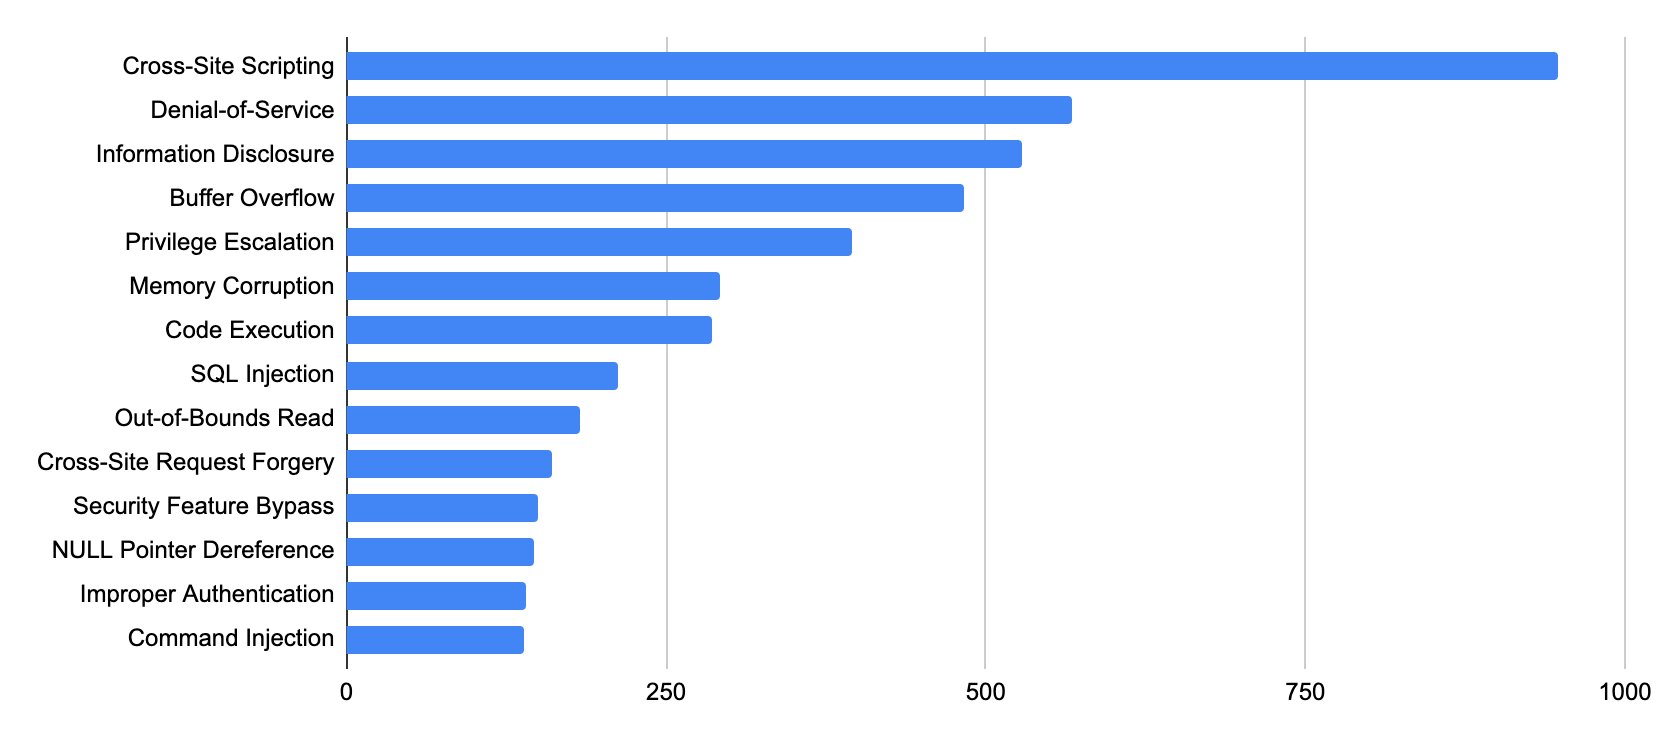 Vulnerability category distribution for CVEs registered in August-October 2021, ranked by how prevalent the type of vulnerability is among recently registered CVEs. The categories, from most to least common, are cross-site scripting, denial of service, information disclosure, buffer overflow, privilege escalation, memory corruption, code execution, SQL injection, out-of-bounds read, cross-site request forgery, security feature bypass, NULL pointer dereference, improper authentication and command injection. 